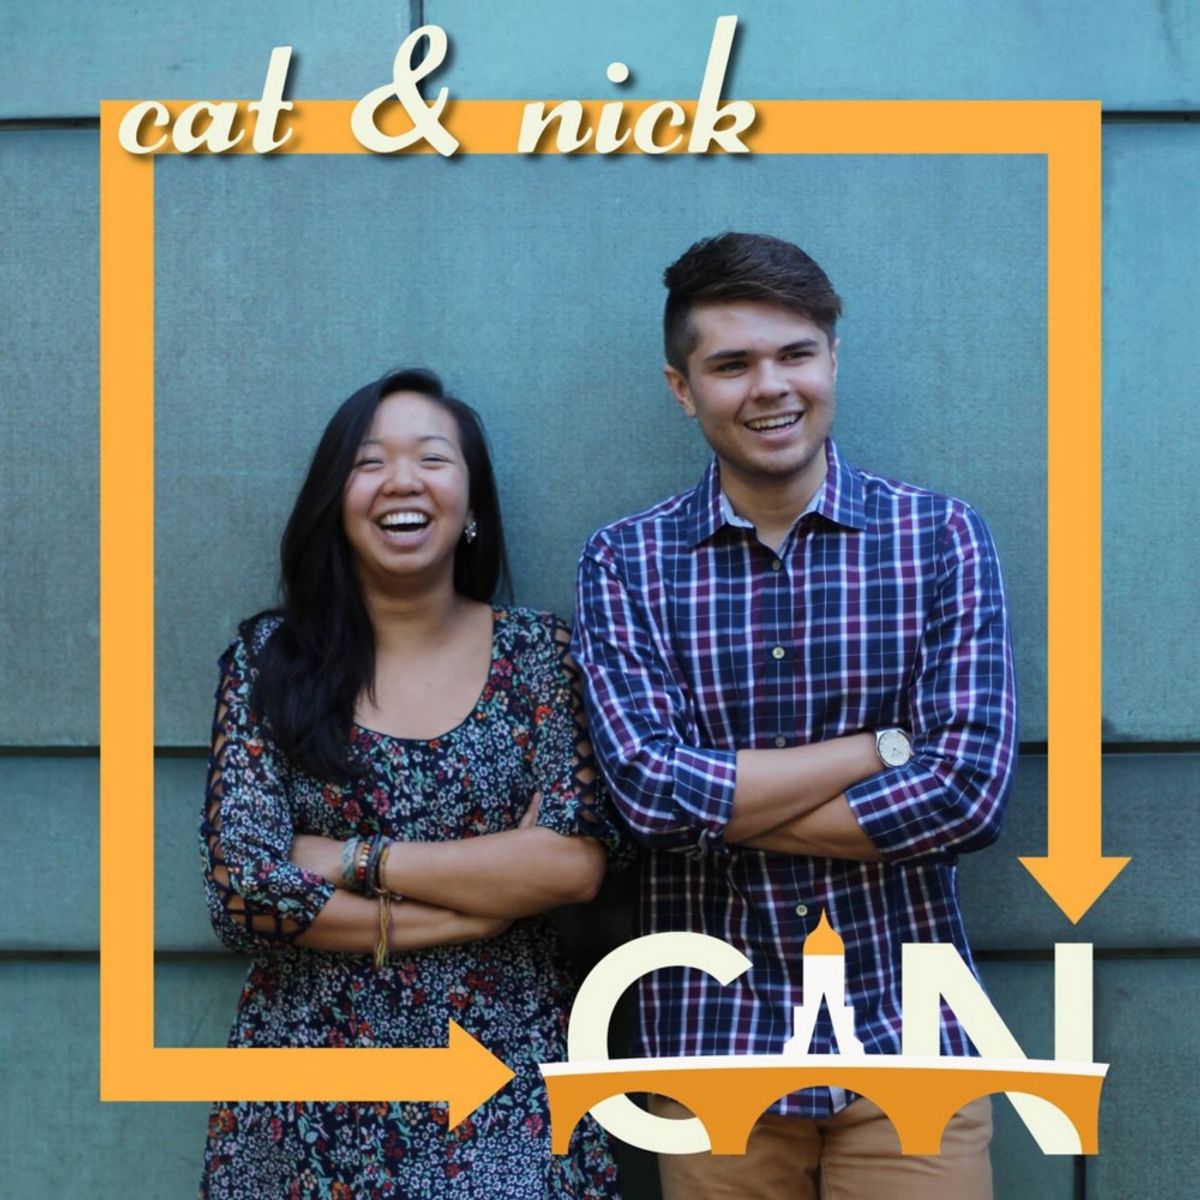 Catherine Zhang and Nicholas Boucher are pictured above in a campaign photo.